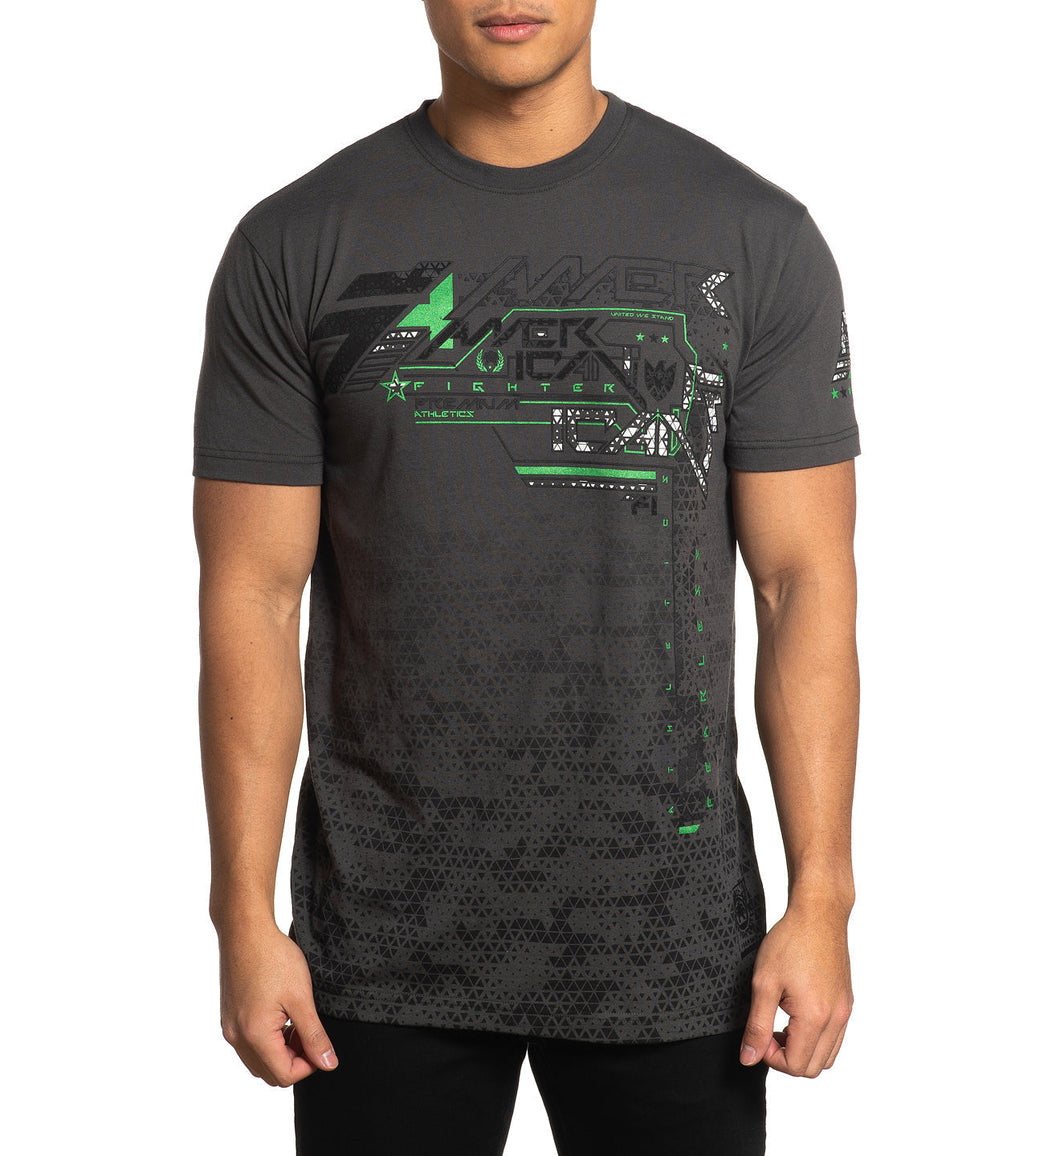 American Fighter Dale Mens Tee Shirt FM13730